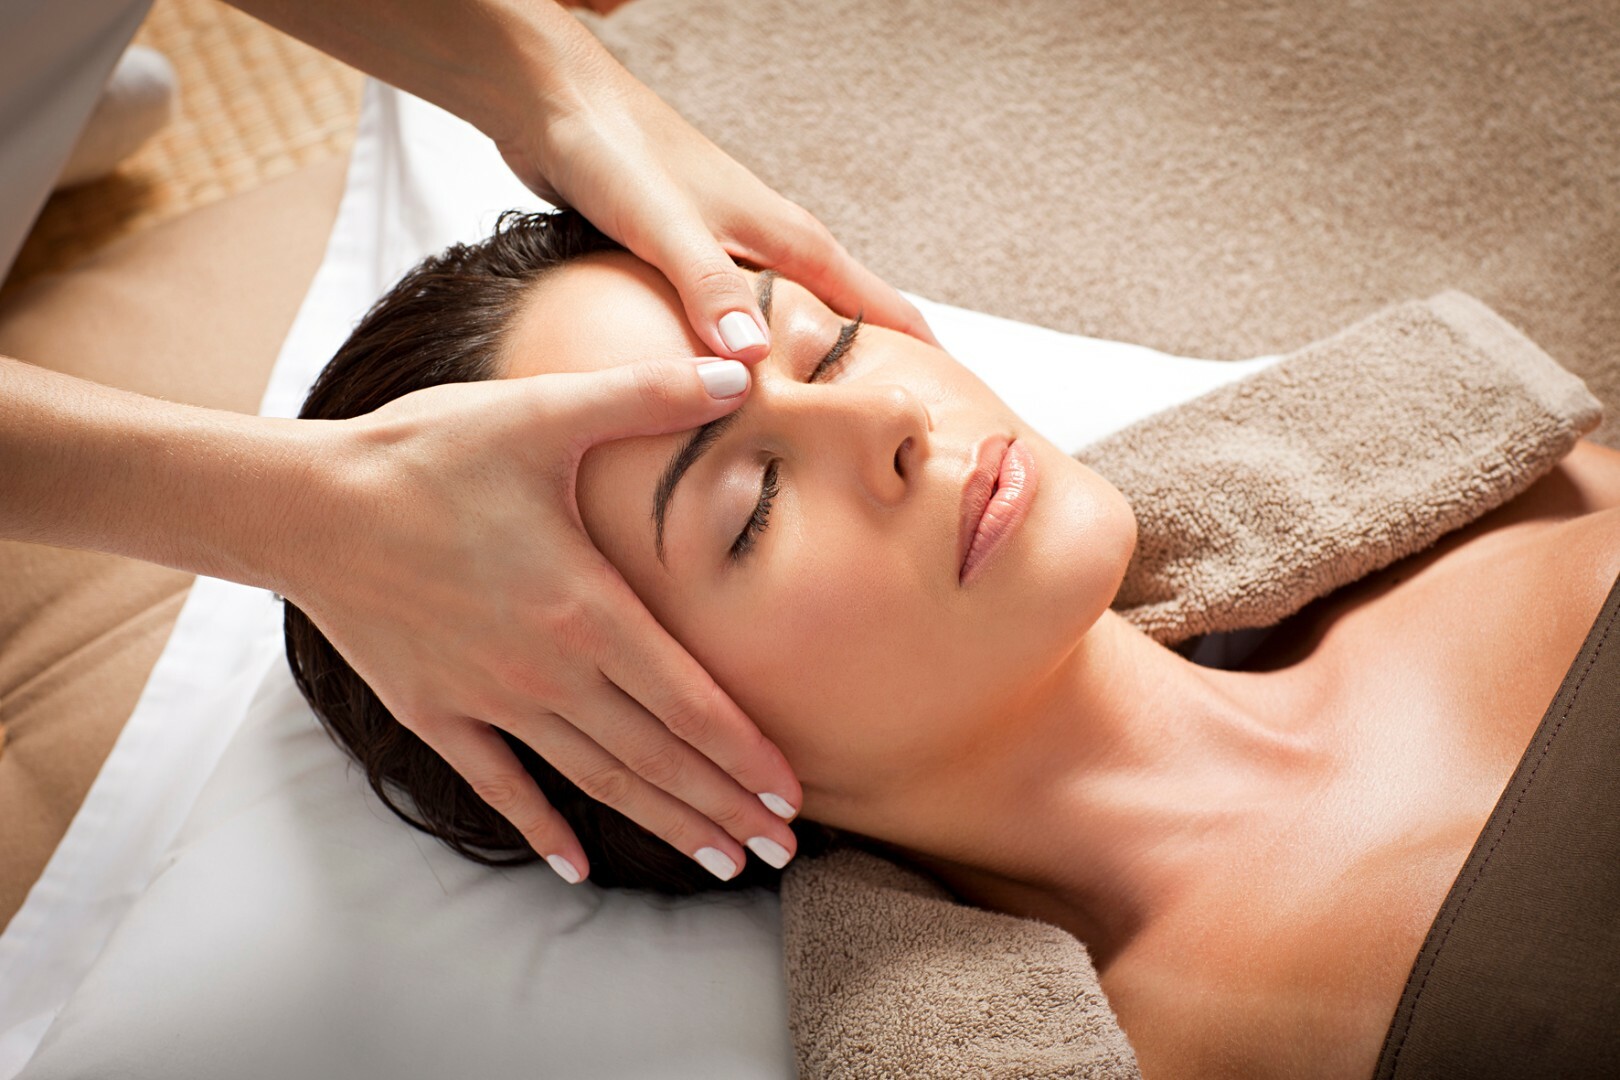 How to become a freelance massage therapist?